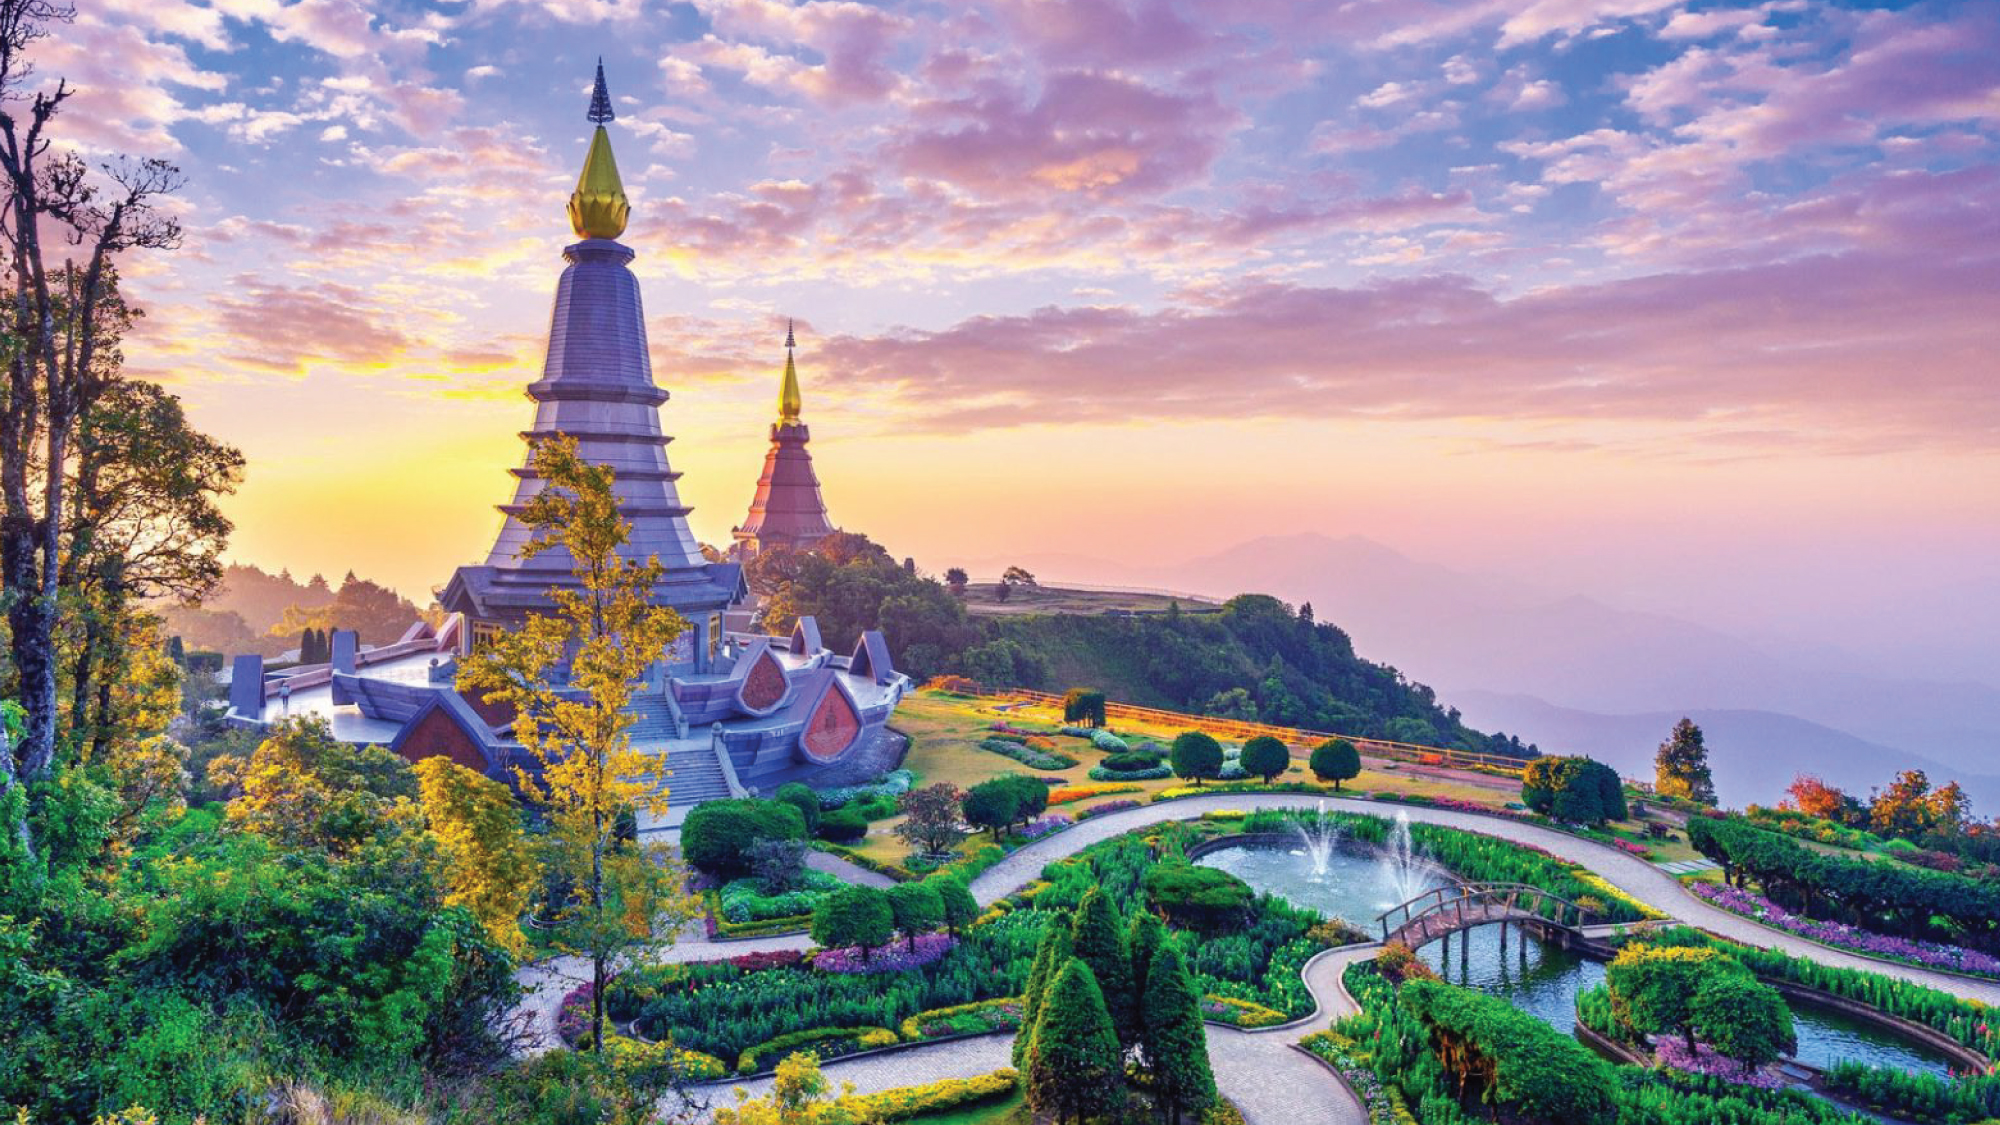 Traditional Thai architecture and serene gardens.